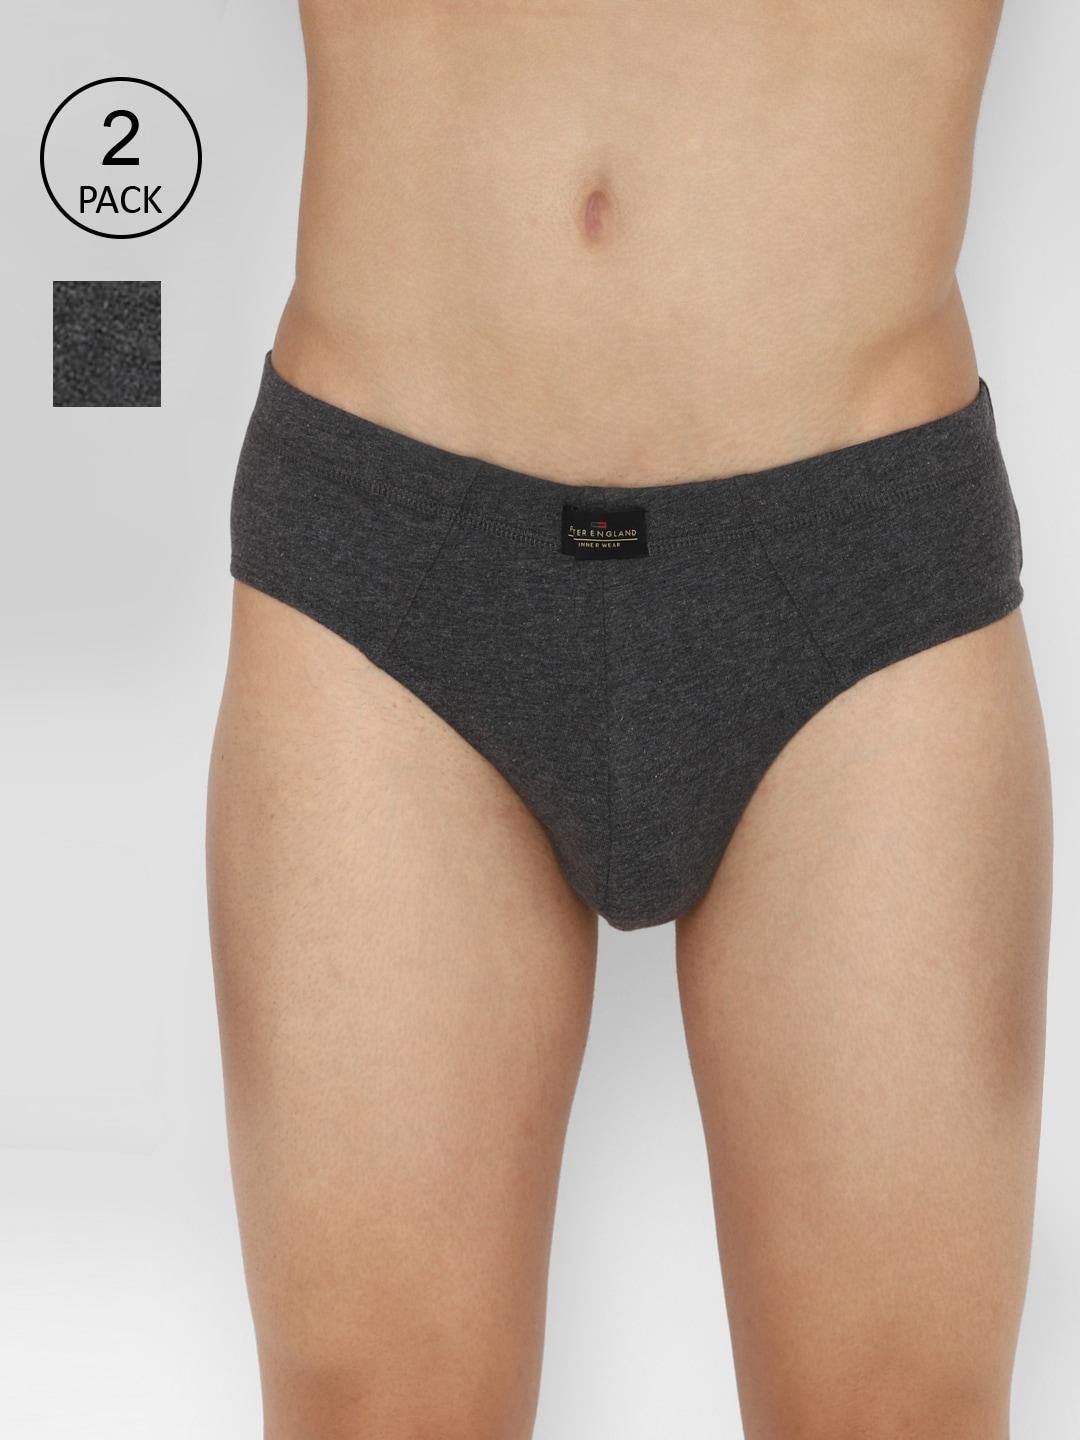 peter-england-men-pack-of-2-charcoal-grey-cotton-briefs-pebfmrgba99873